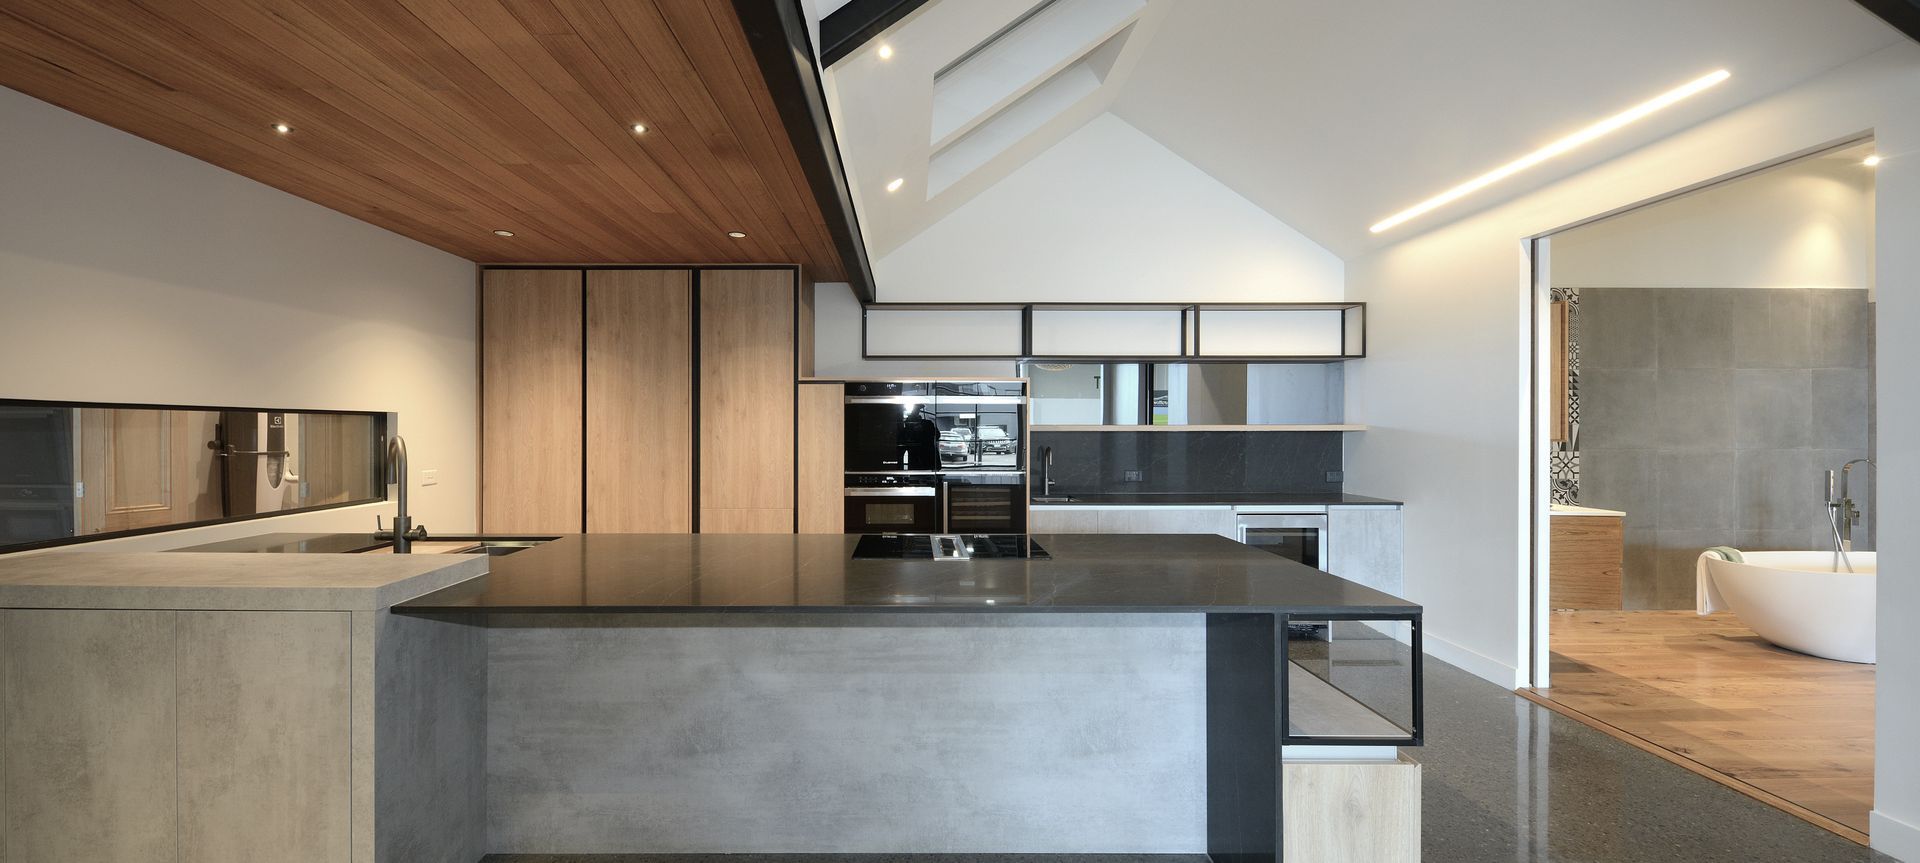 Contemporary Kitchen On Display banner